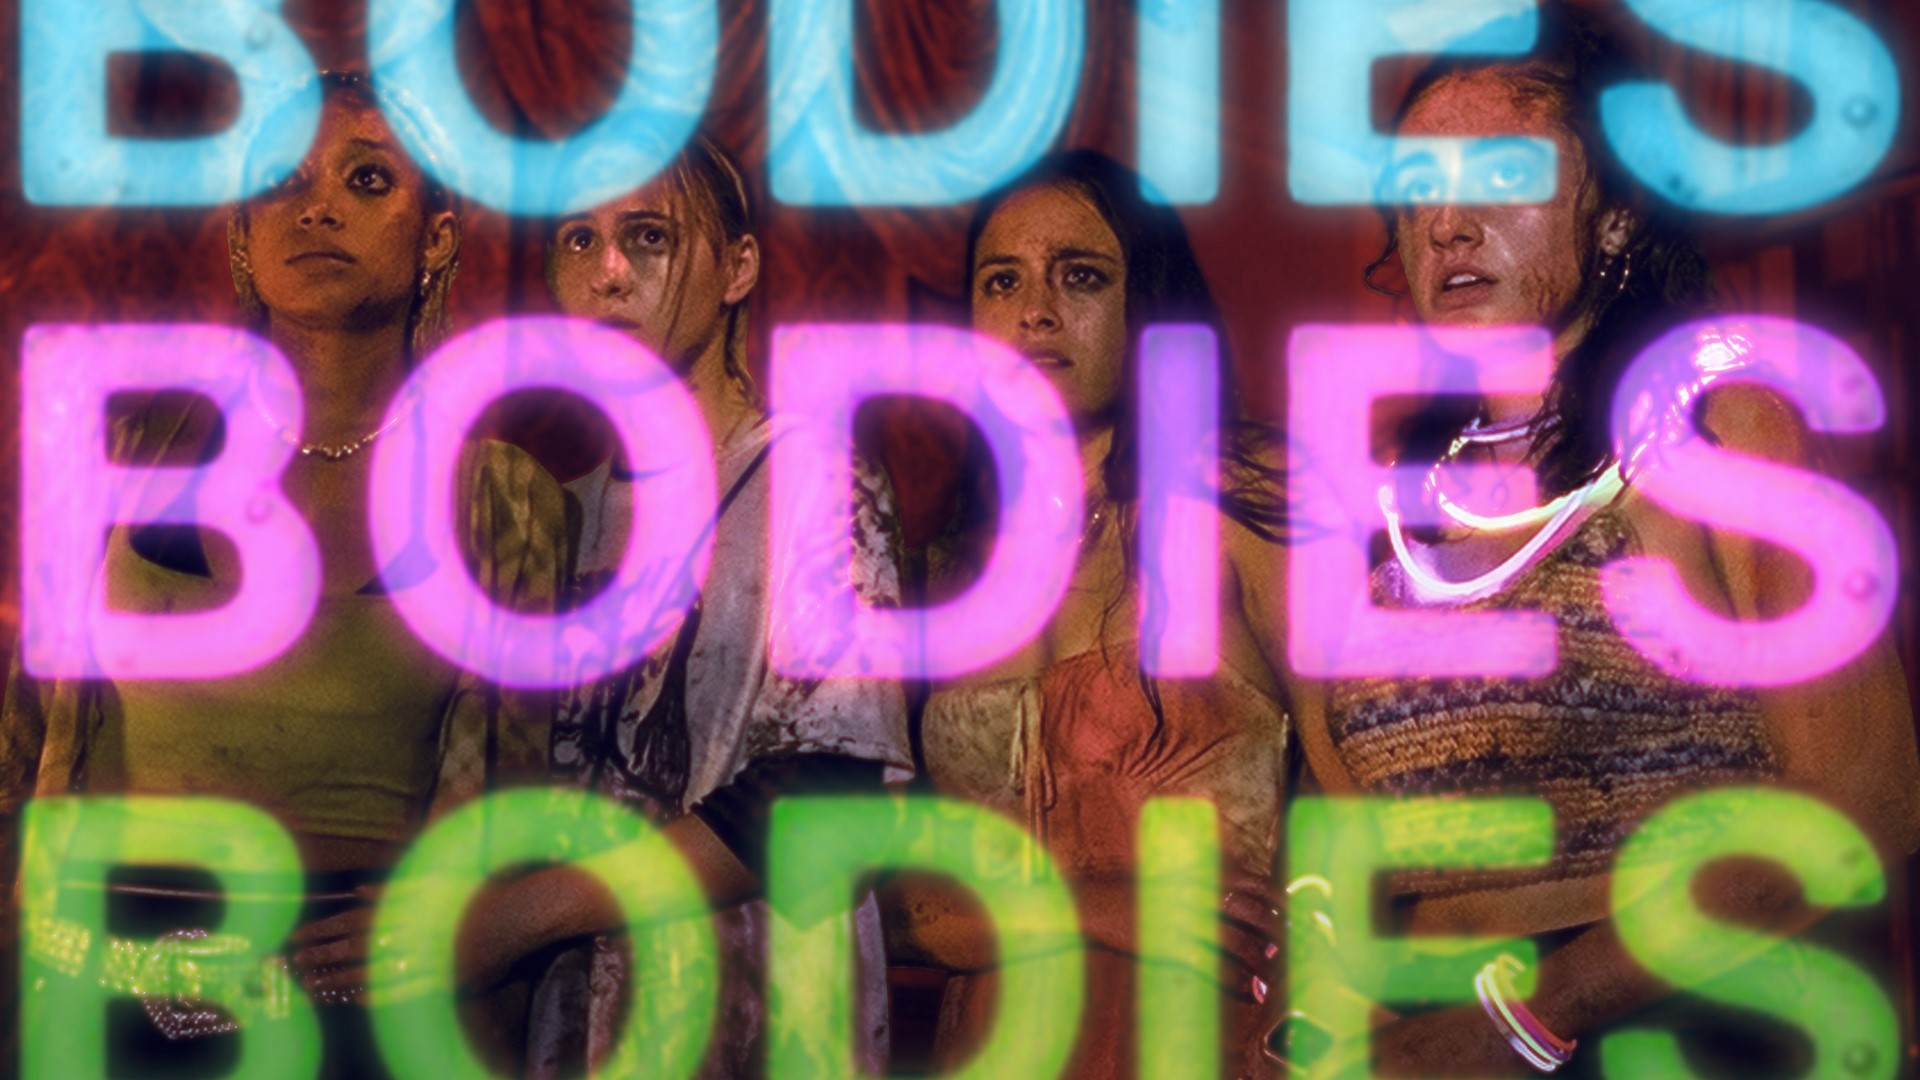 Bodies Bodies Bodies is cloaked in modern slang and Gen Z culture but it's a timeless look at mass hysteria and how facts can be distorted.